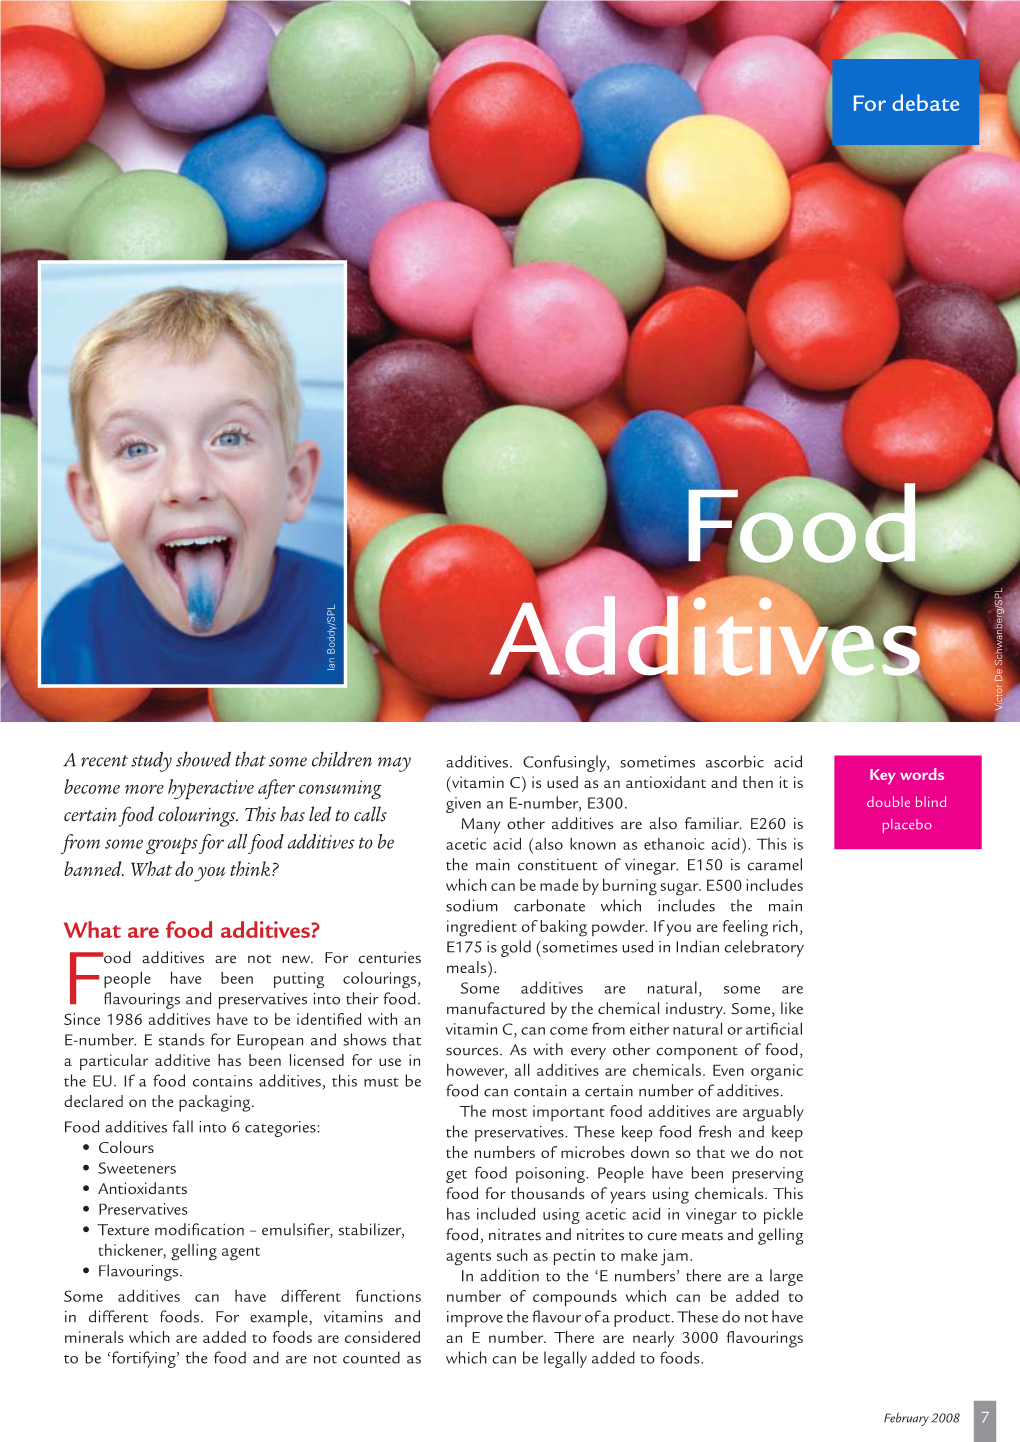 Food Additives to Be Acetic Acid (Also Known As Ethanoic Acid)